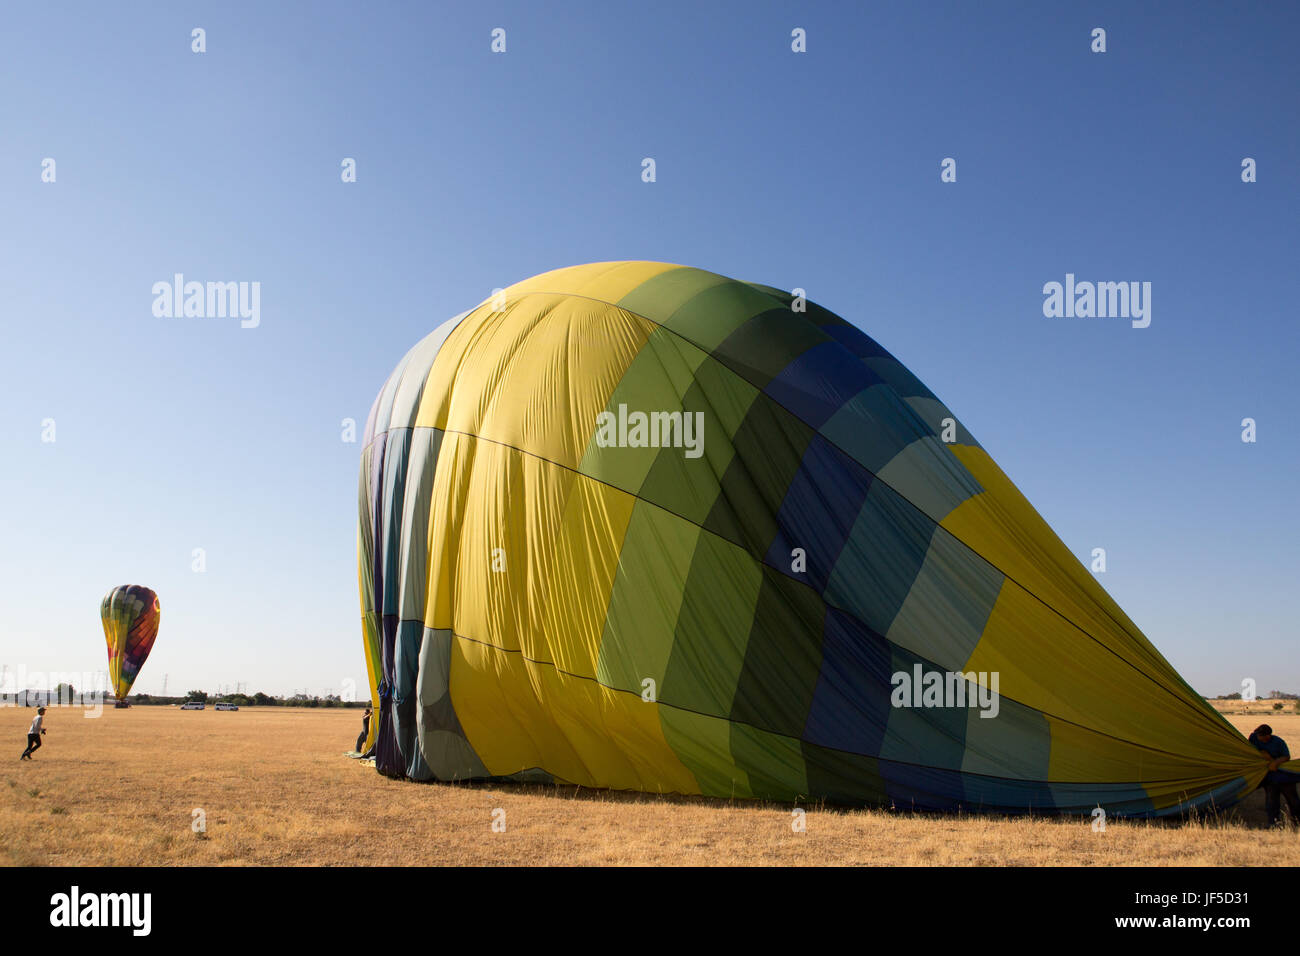 Several people deflate hot air balloons in an open field. Stock Photo